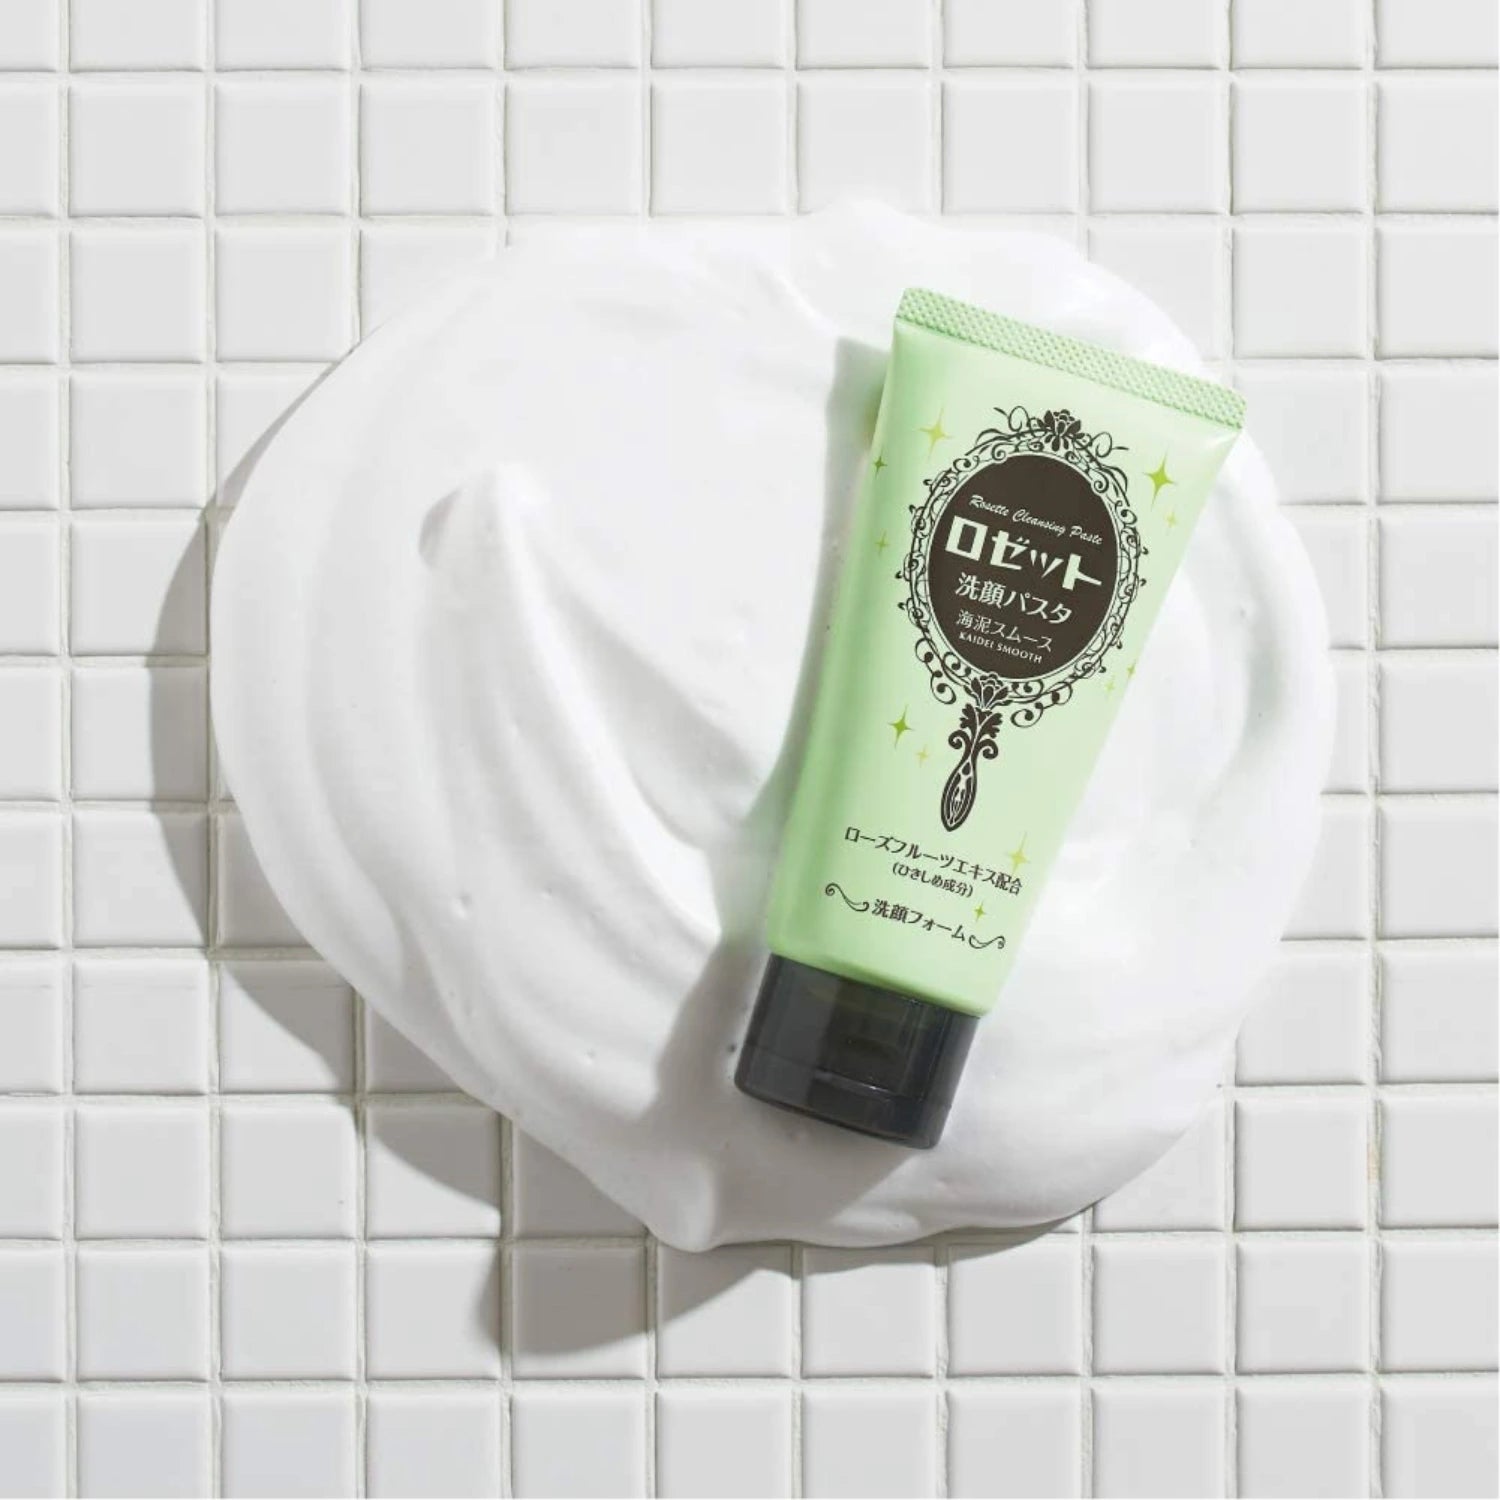 Rosette Cleansing Paste Kaidei Smooth 180g - Buy Me Japan